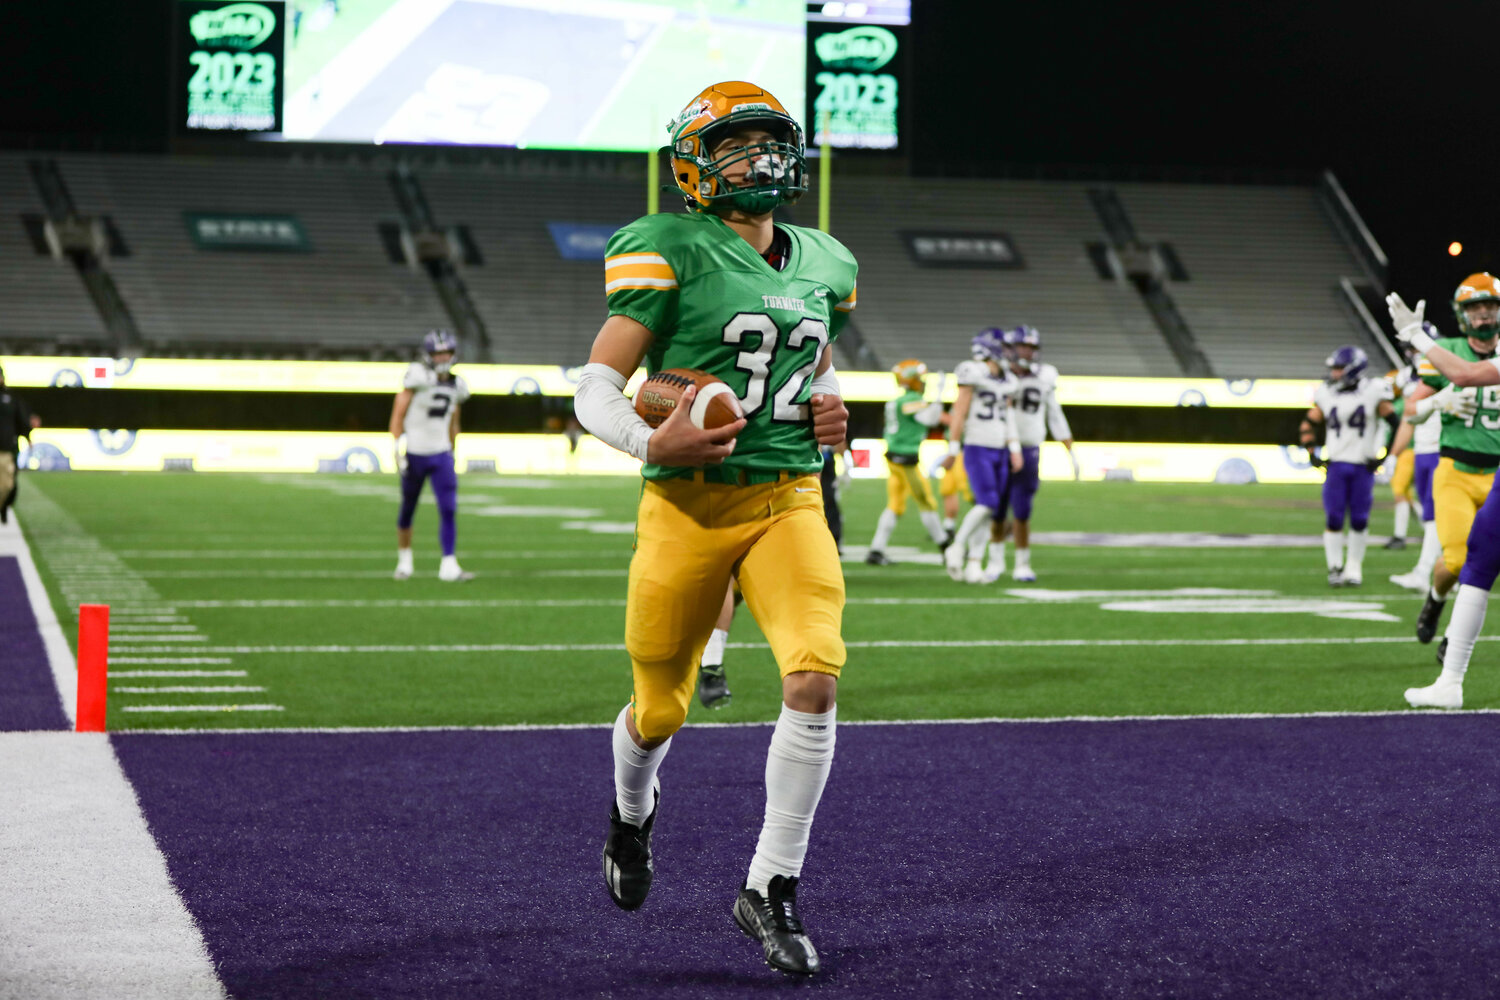 Tumwater's Peyton Davis in the endzone after a TD run  during a 60-30 loss to Anacortes Dec. 2. at Husky Stadium.